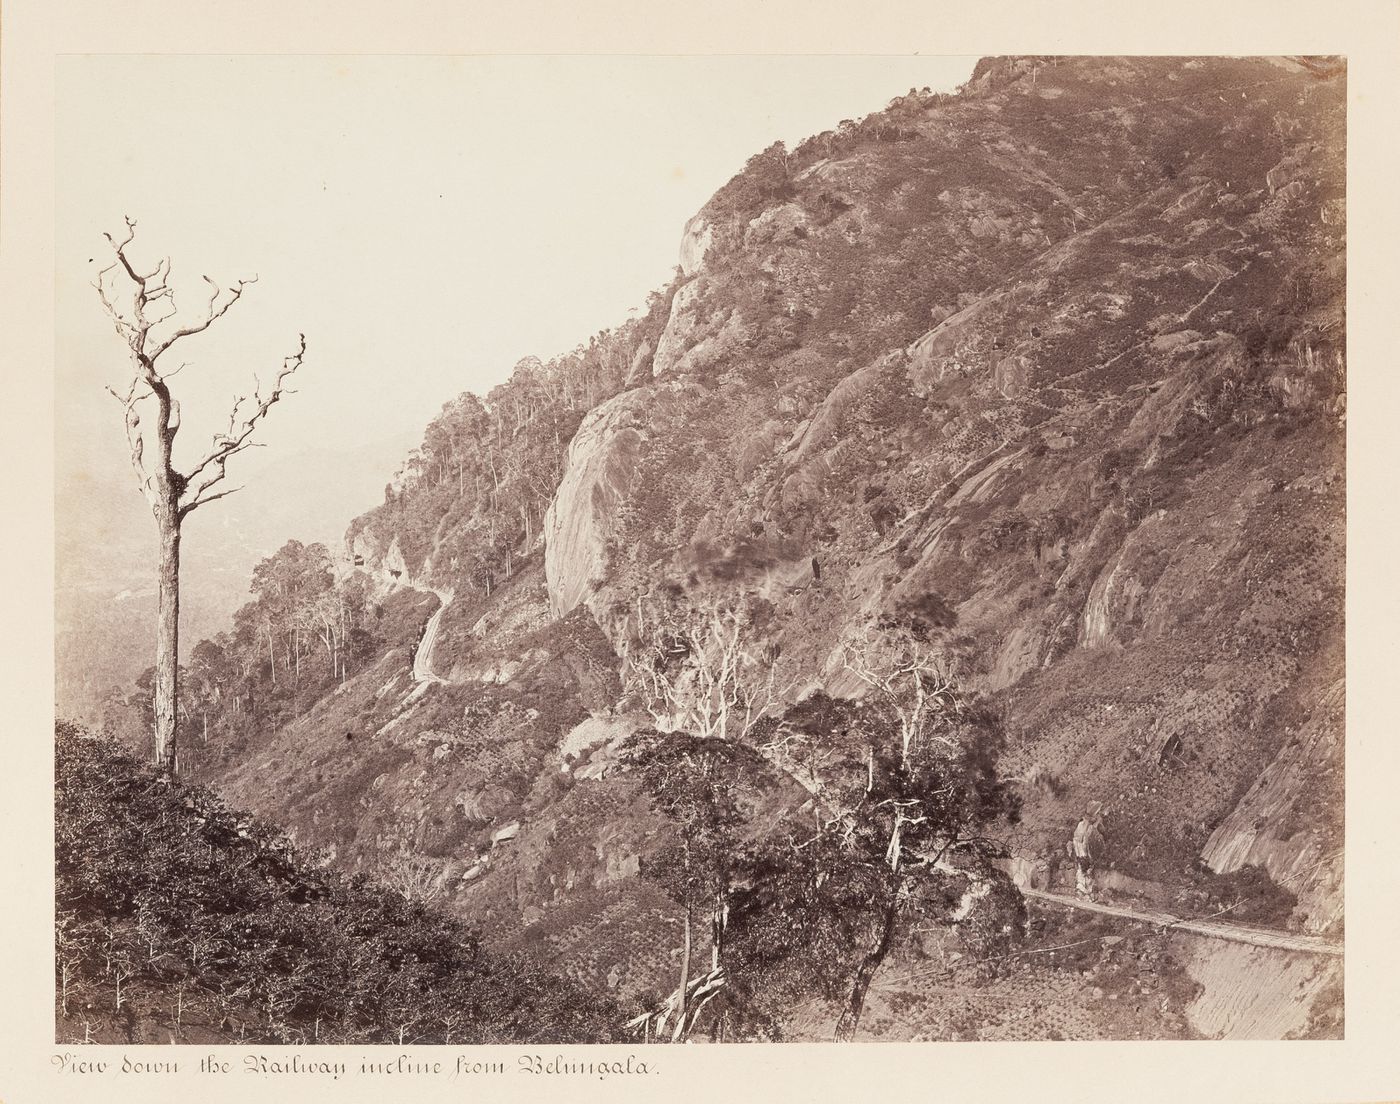 View of the Colombo-Kandy Railway with Bears' Mouth and a tunnel, possibly Tunnel #9, on the left, from Belungala, Ceylon (now Sri Lanka)